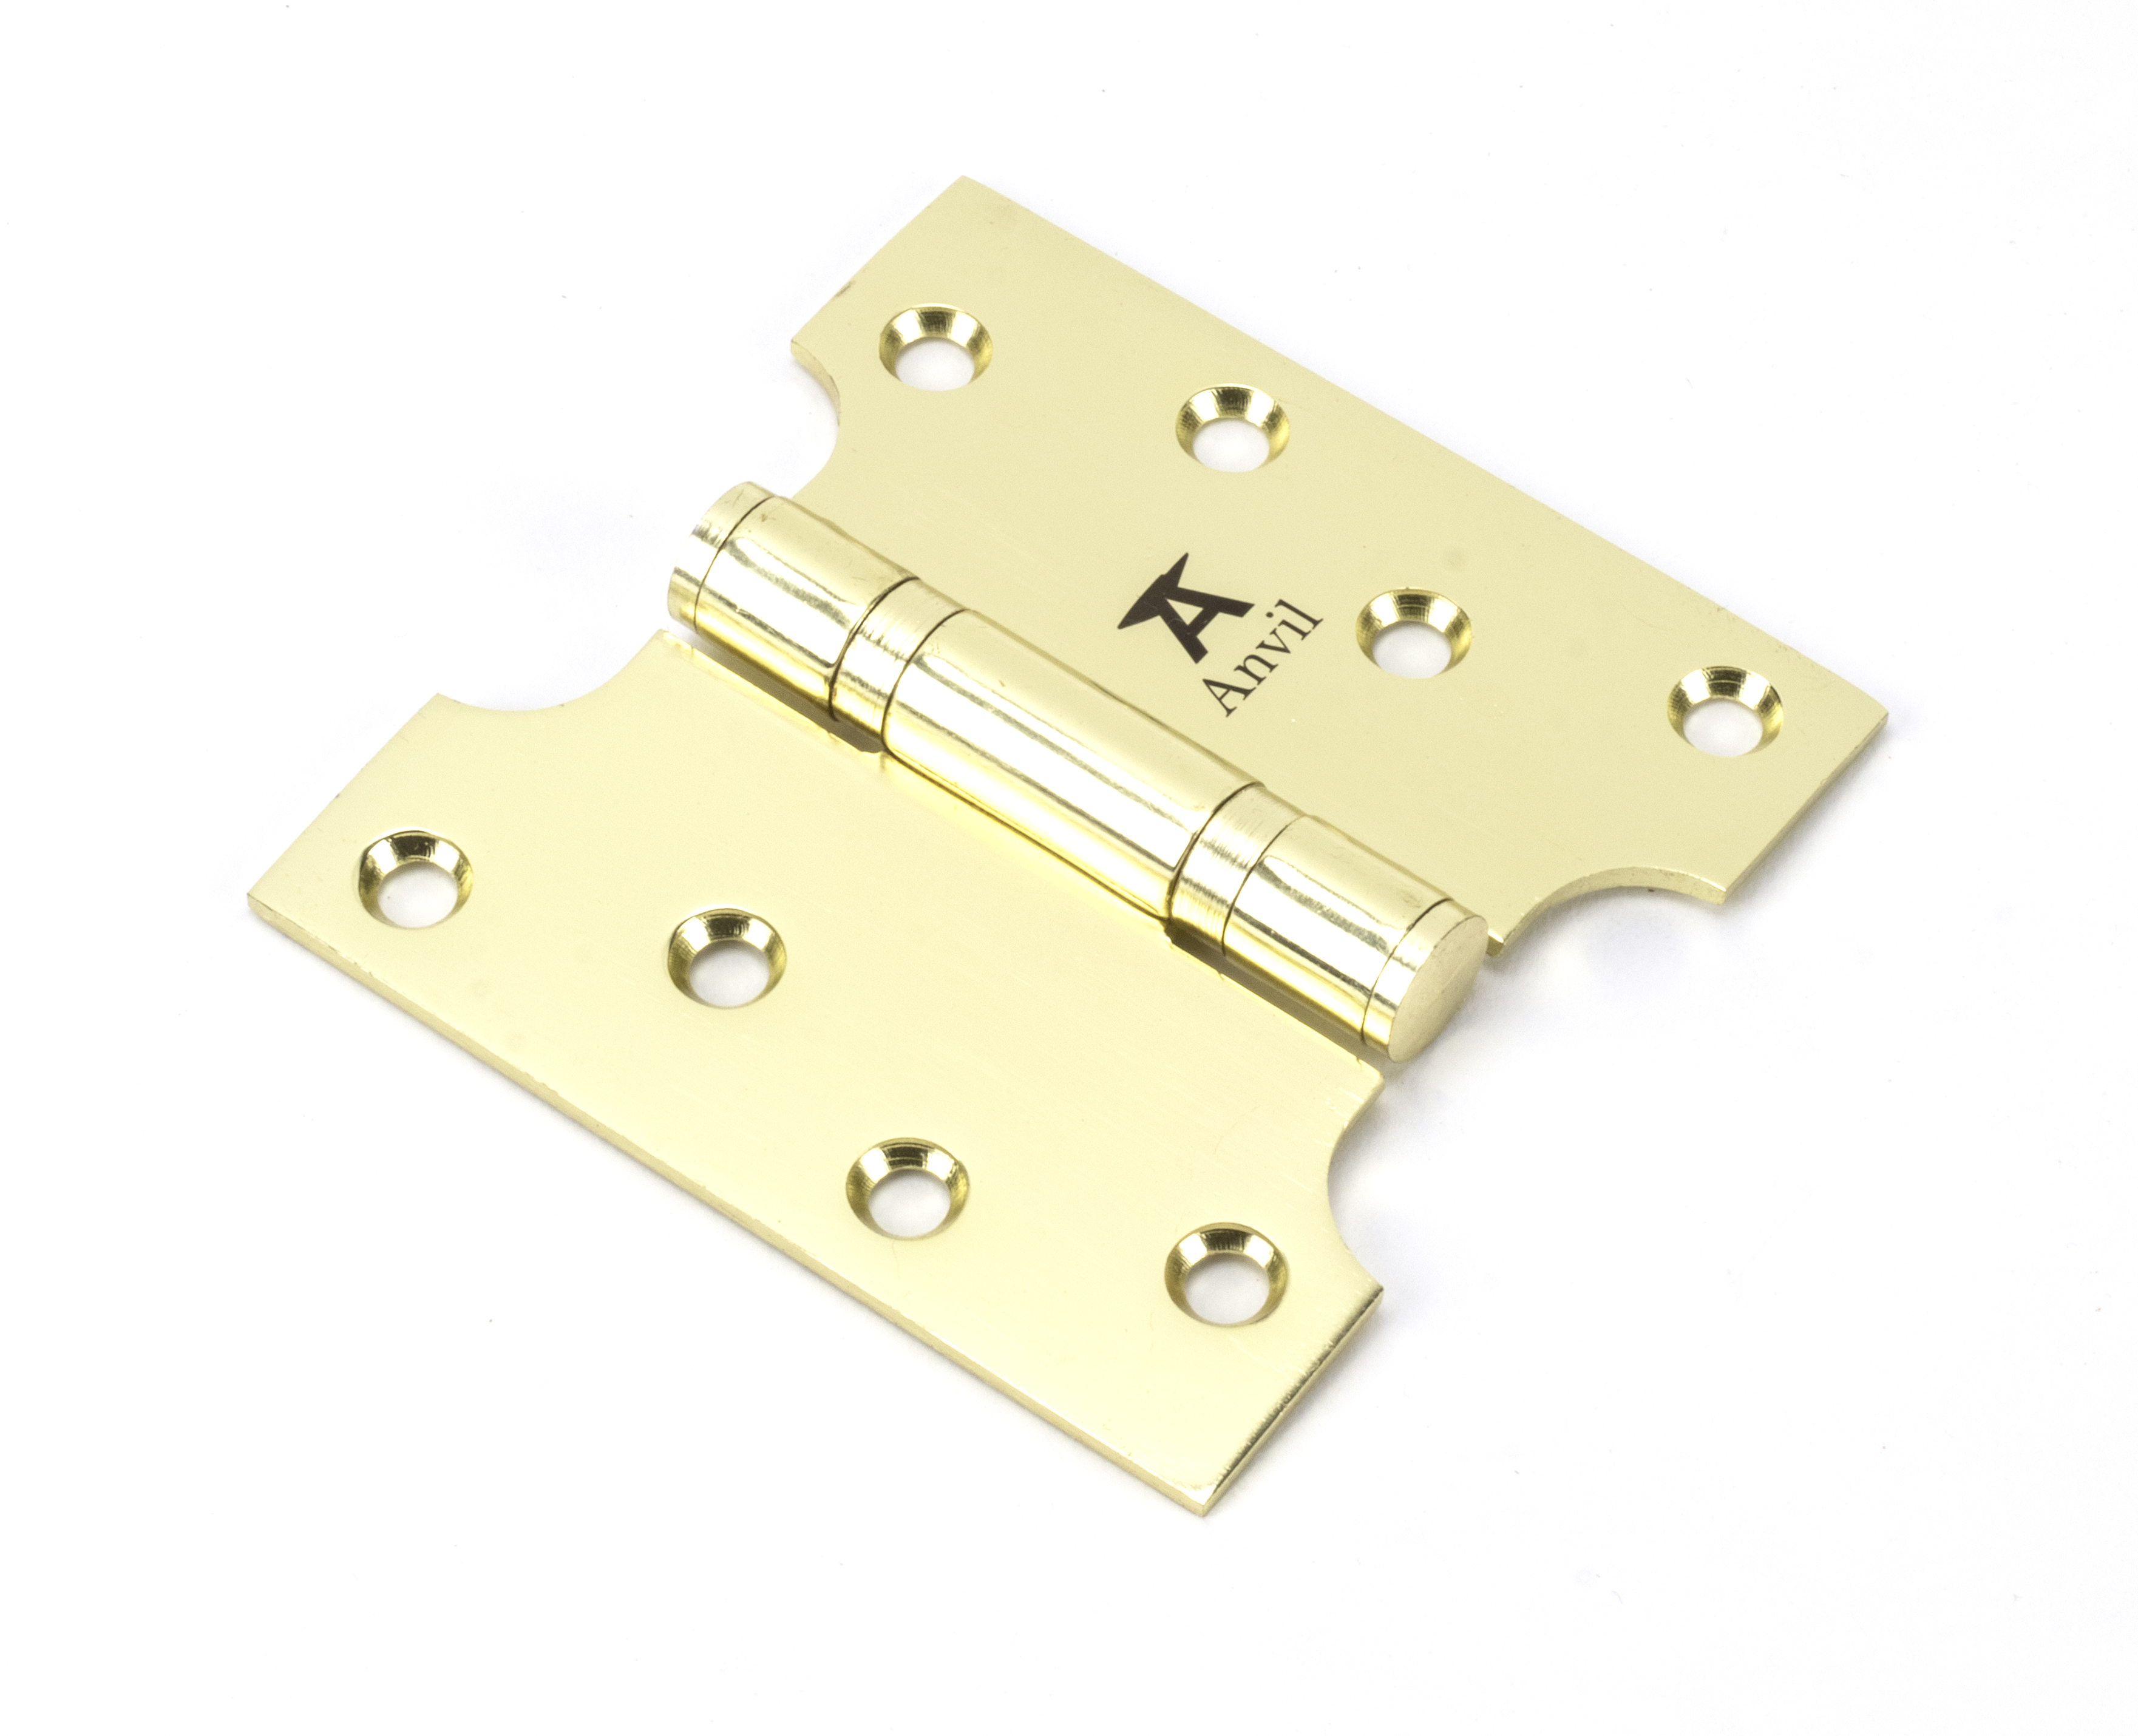 Stainless Steel Parliament Hinge - 4" x 2" x 4"- Pair